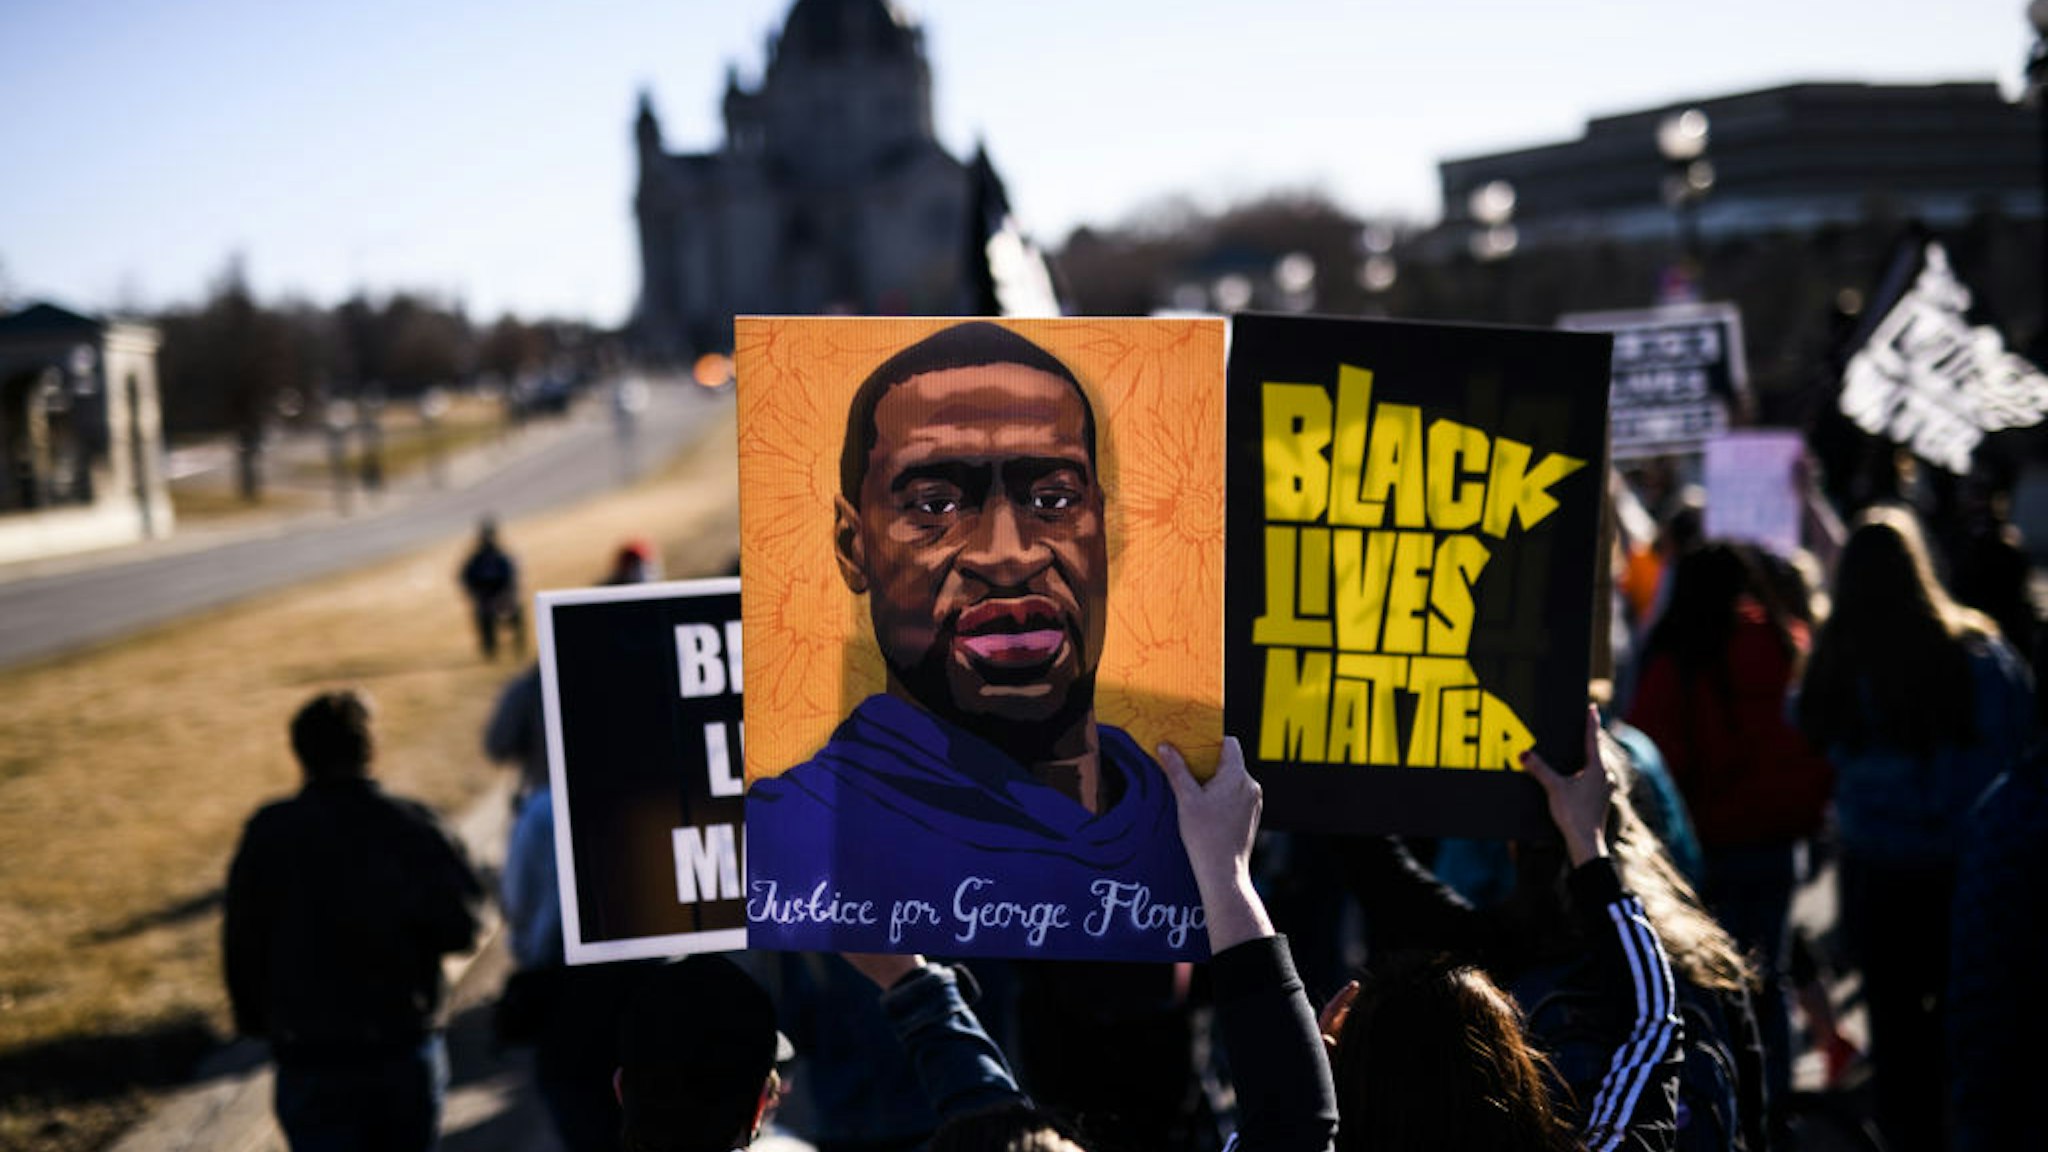 ST PAUL, MN - MARCH 19: People march near the Minnesota State Capitol to honor George Floyd on March 19, 2021 in St Paul, Minnesota. This morning Judge Peter Cahill rejected motions for change of venue and continuance by the defense of former Minneapolis Police officer Derek Chauvin, who is accused of killing George Floyd last May.